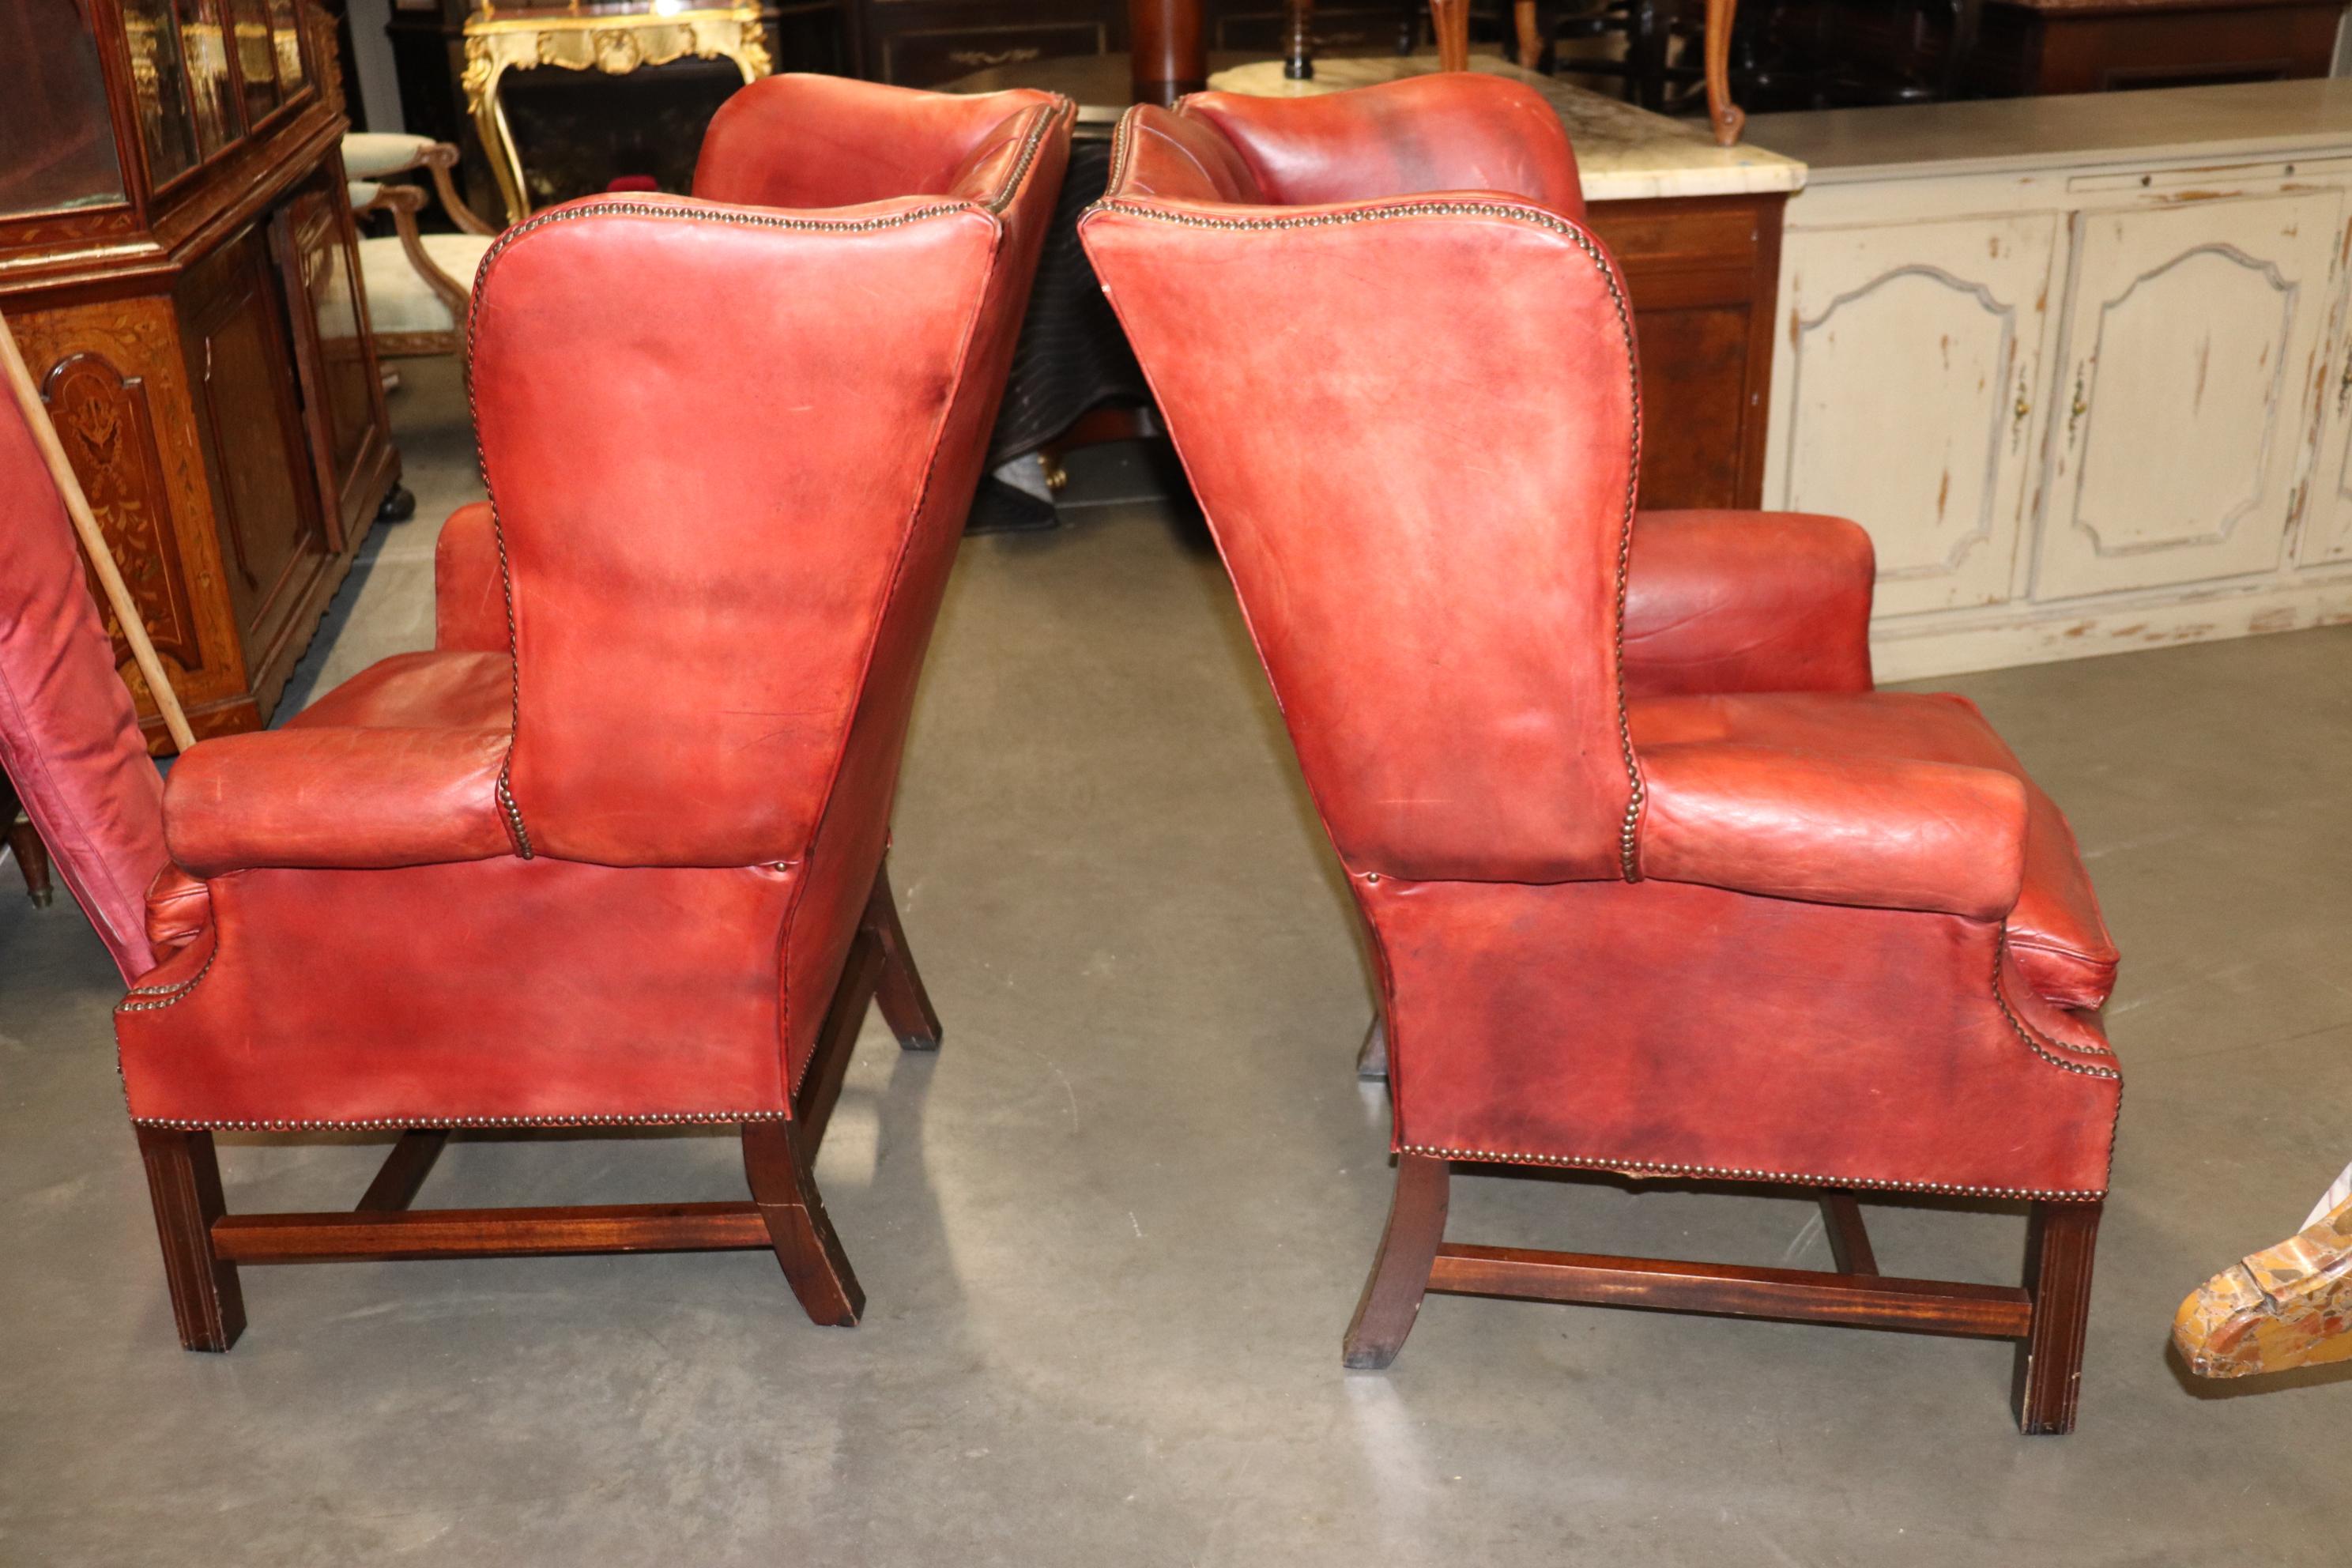 Pair Antique 1920s Era Red Leather Chertfield Tufted Georgian Wingback Chairs 8